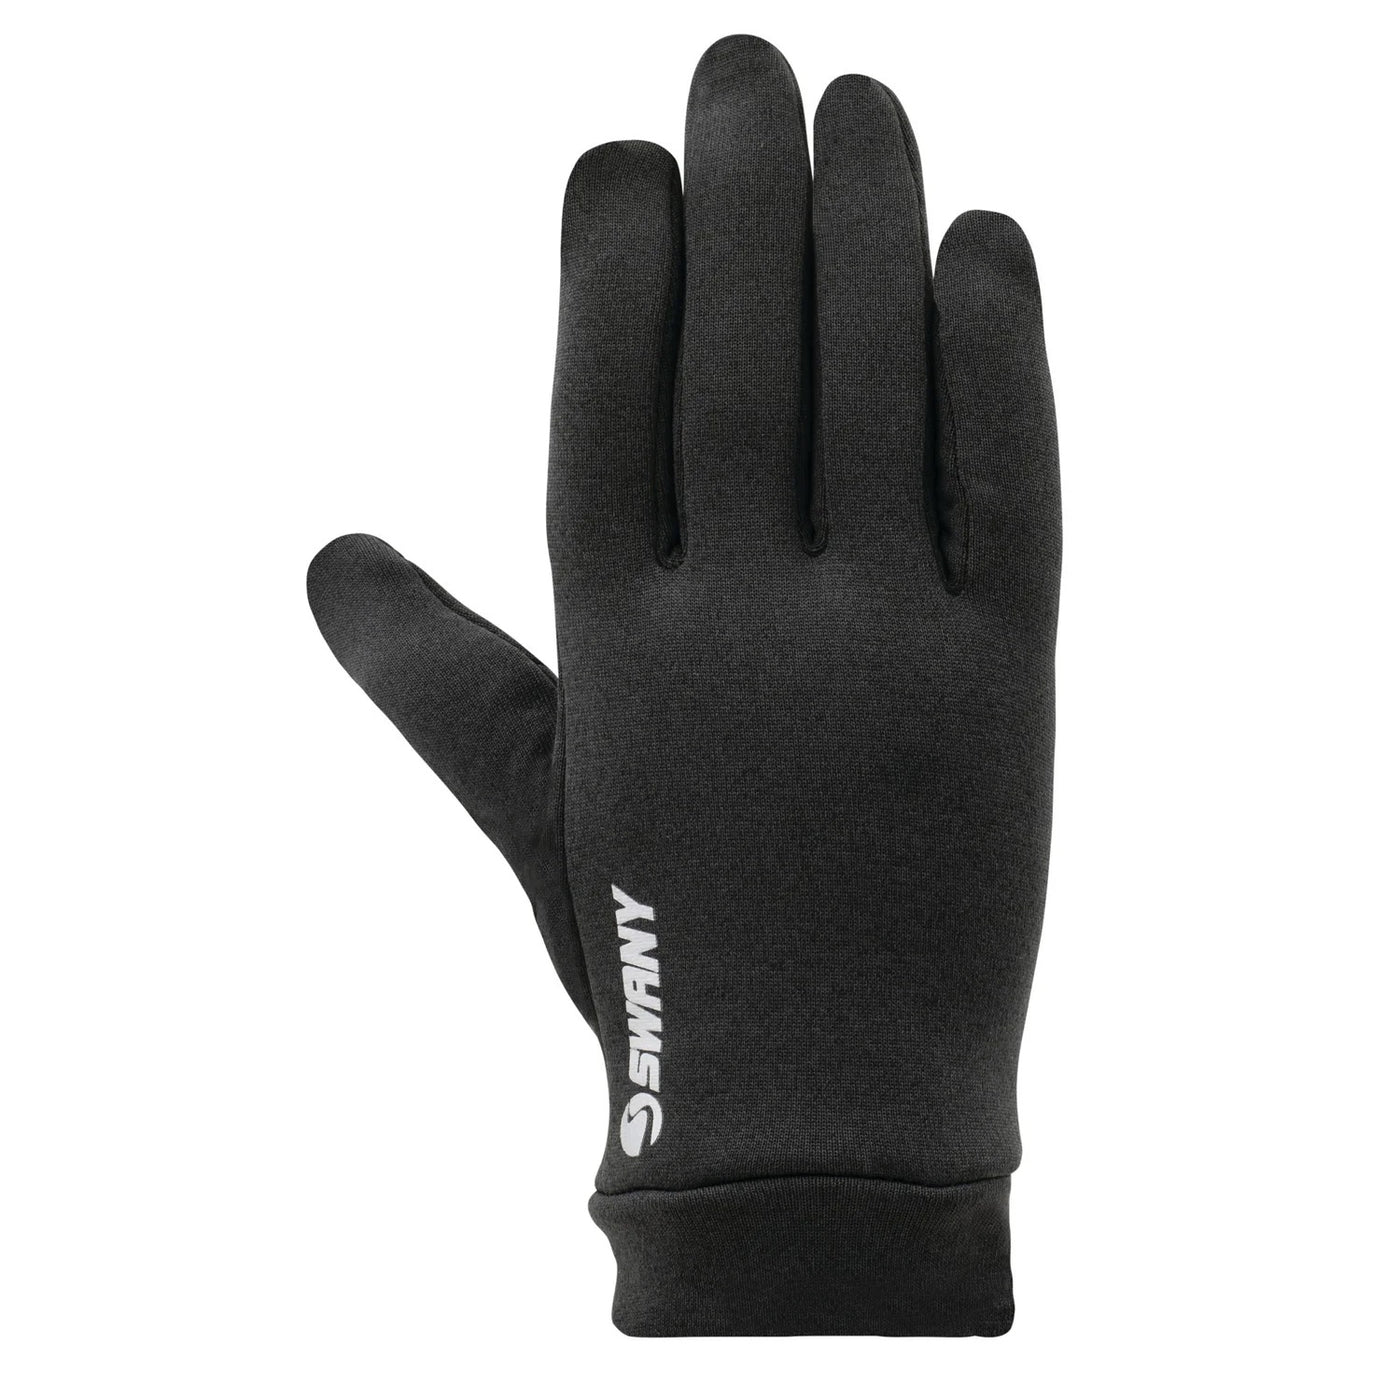 Swany Powerdry Glove Liner